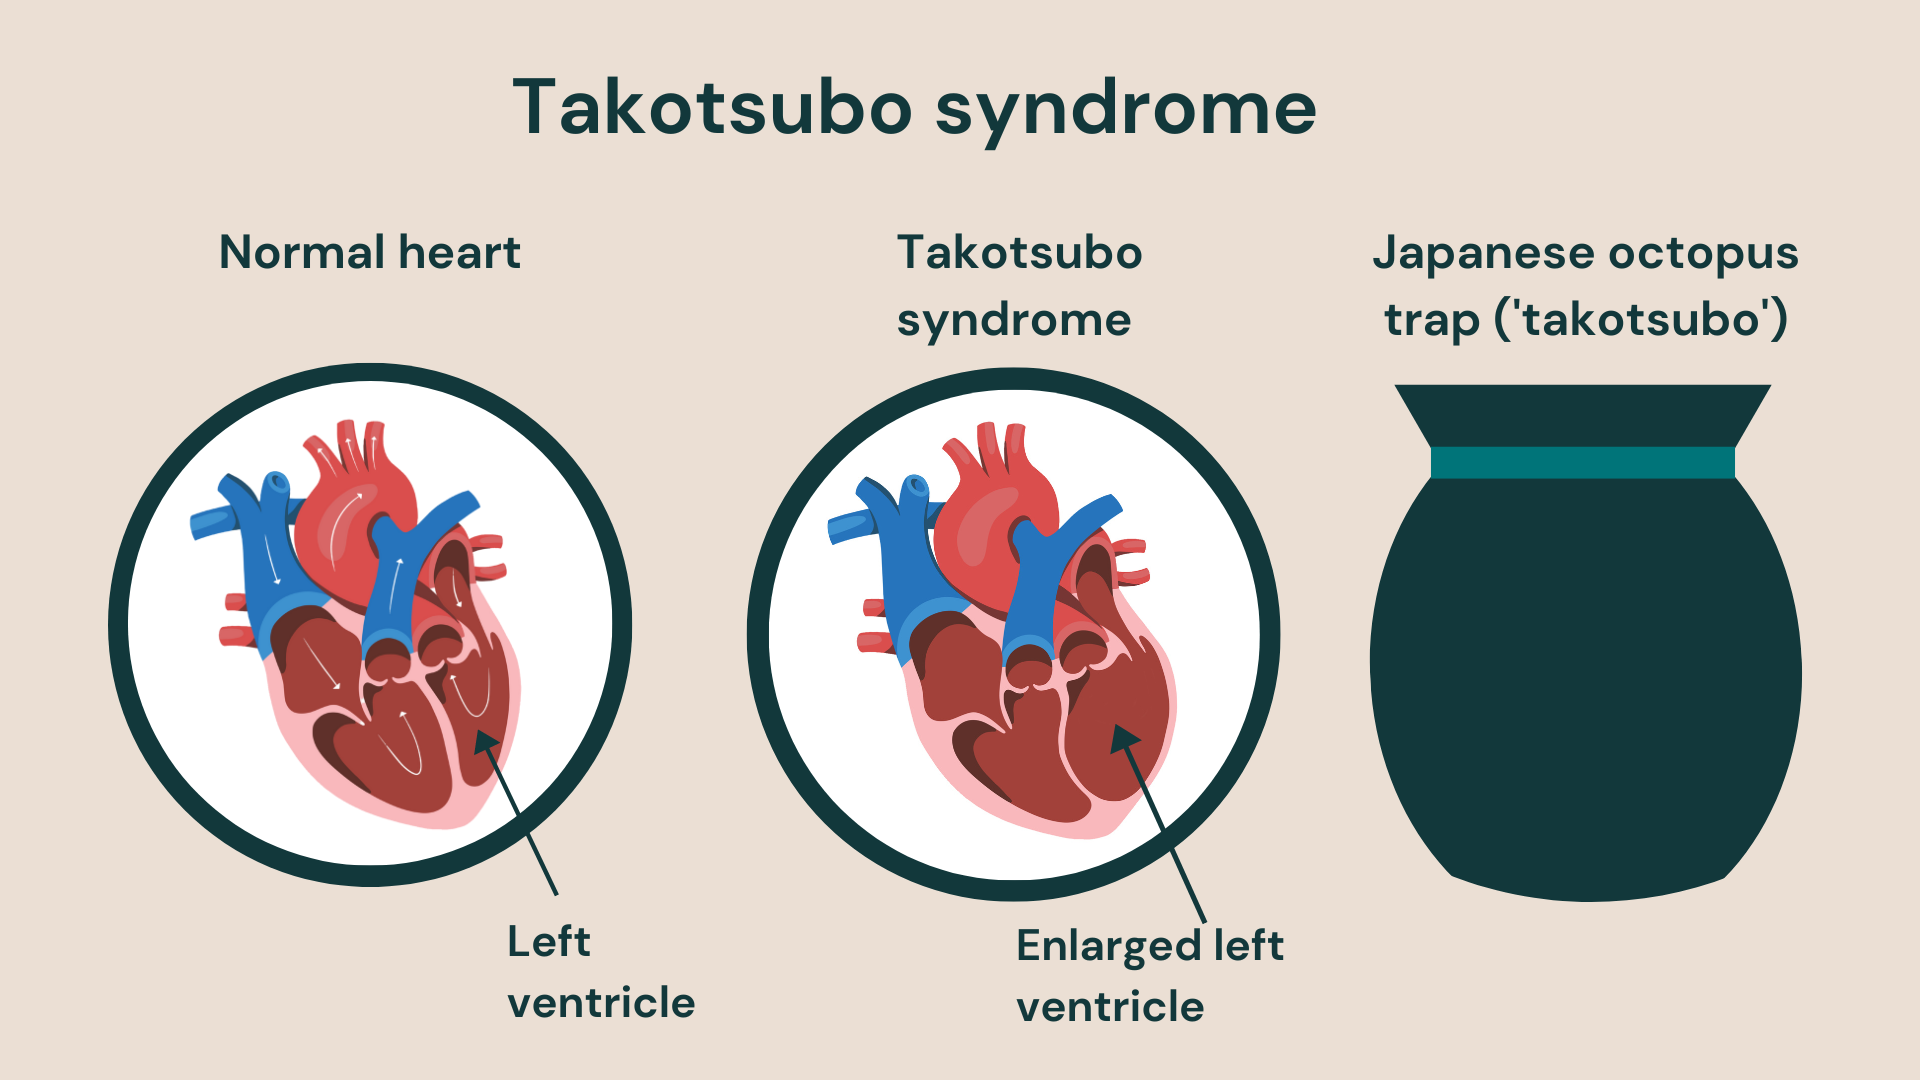 Takotsubo syndrome results in an englarged left heart ventricle